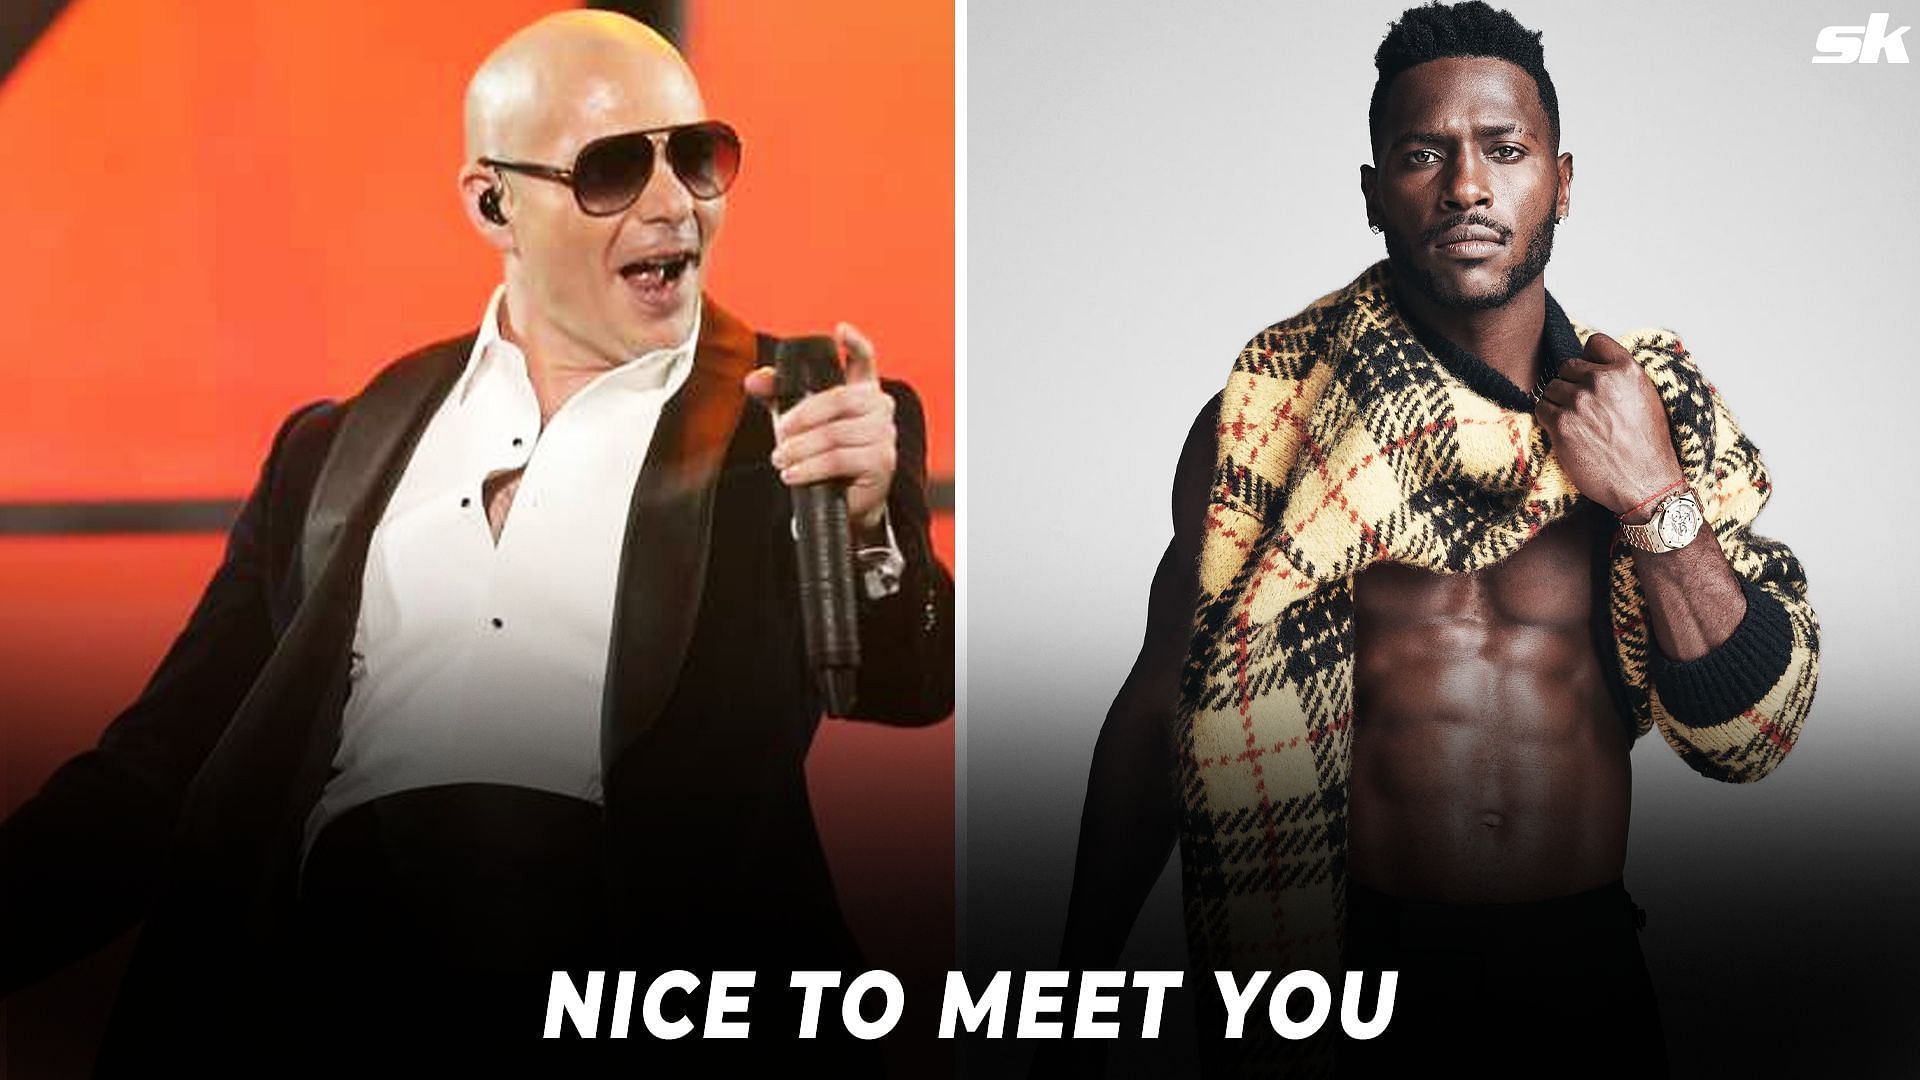 Recording artist Pitbull and former NFL wide receiver Antonio Brown